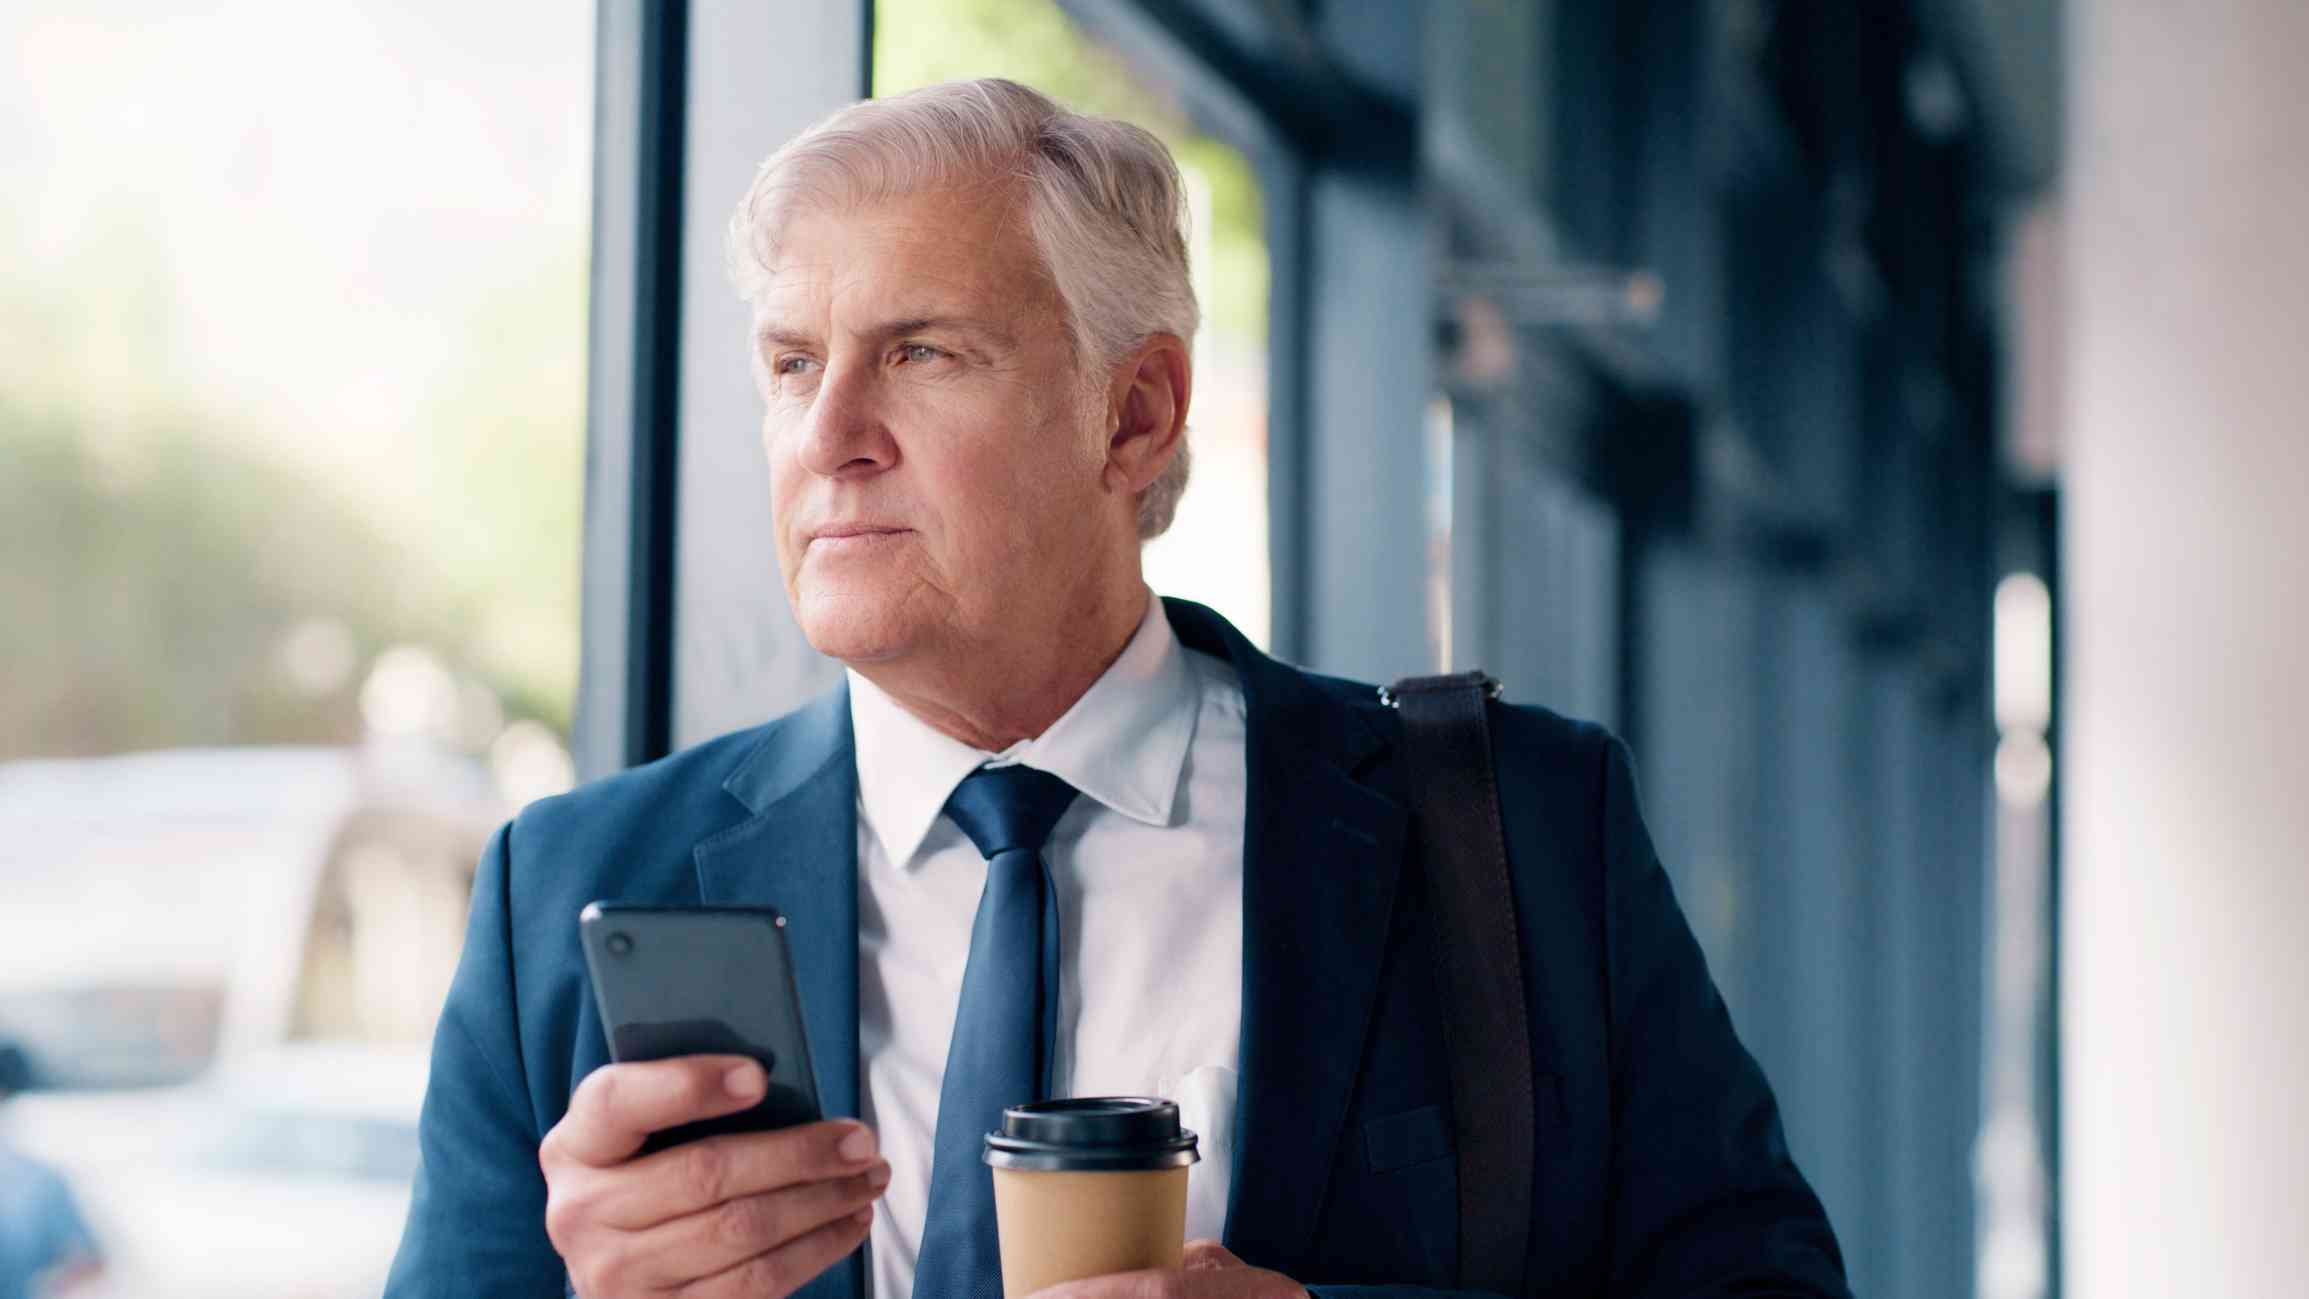 A male mental health professional in a business suit stands near a window and gazes out with a serious expression while holding his cellphone.